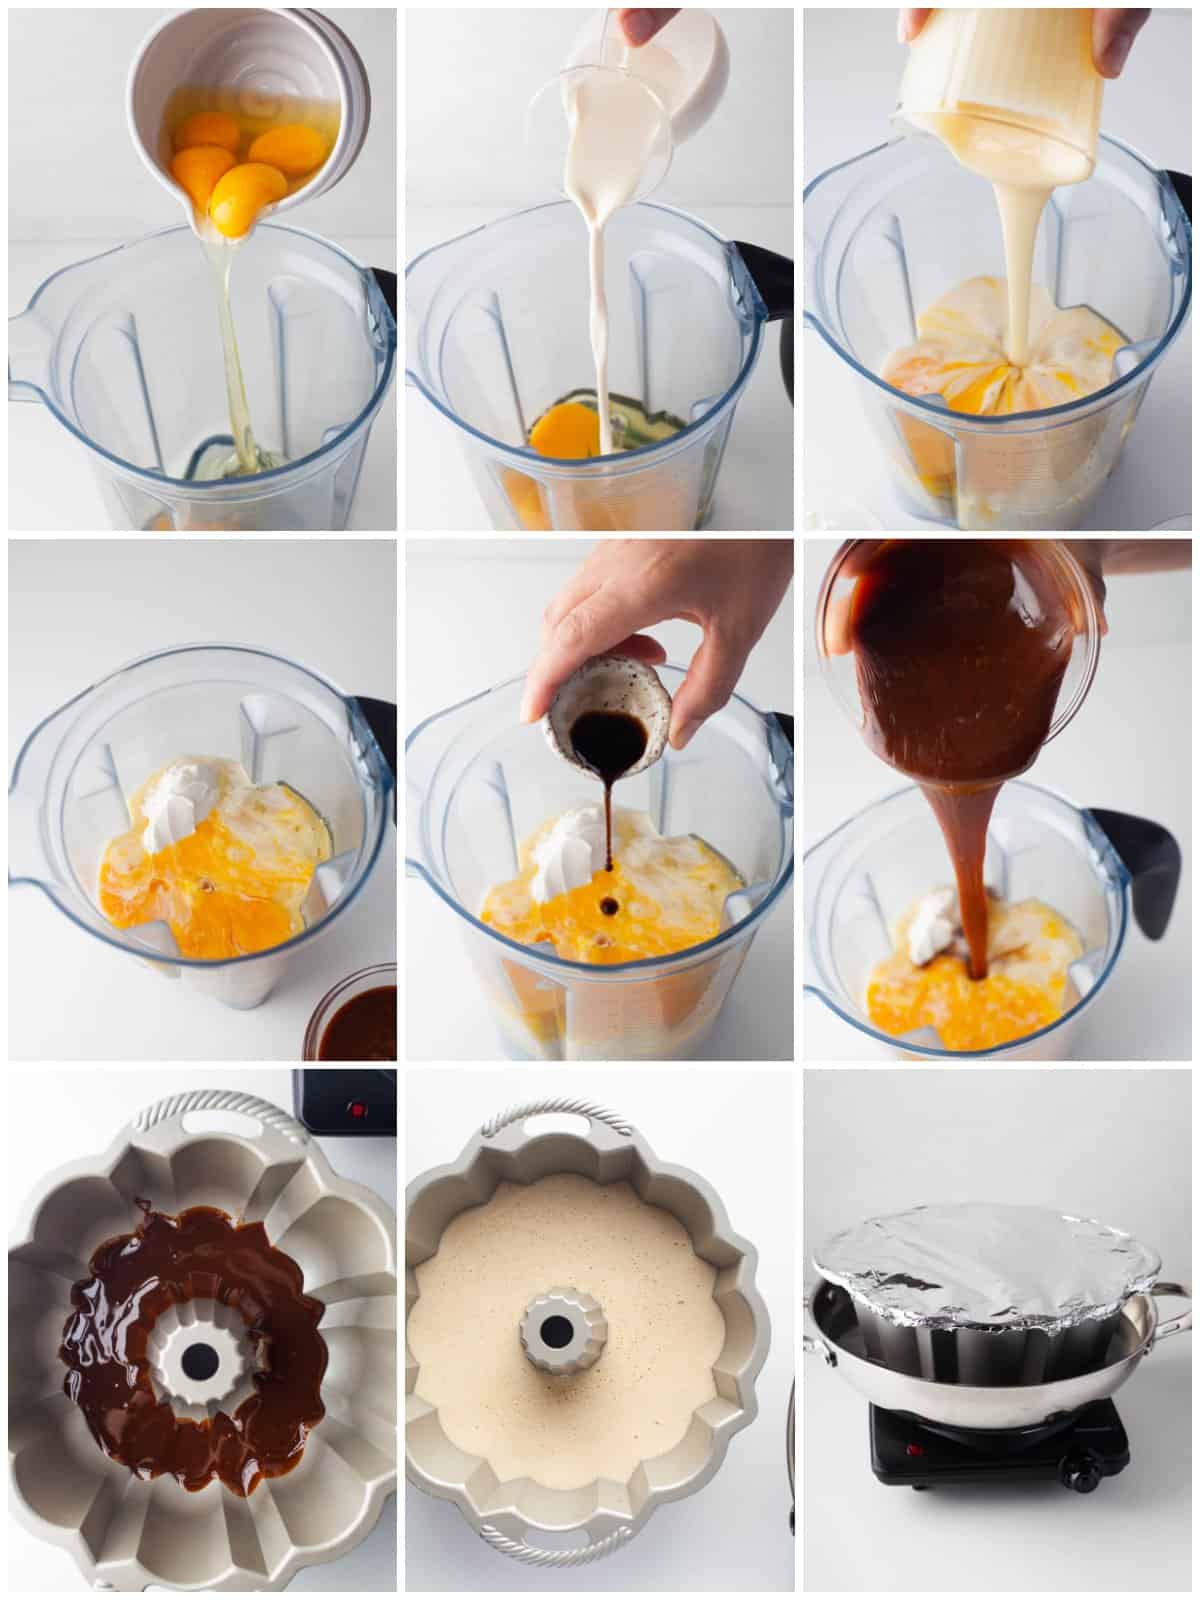 Step by step photos on how to make Mexican Flan.